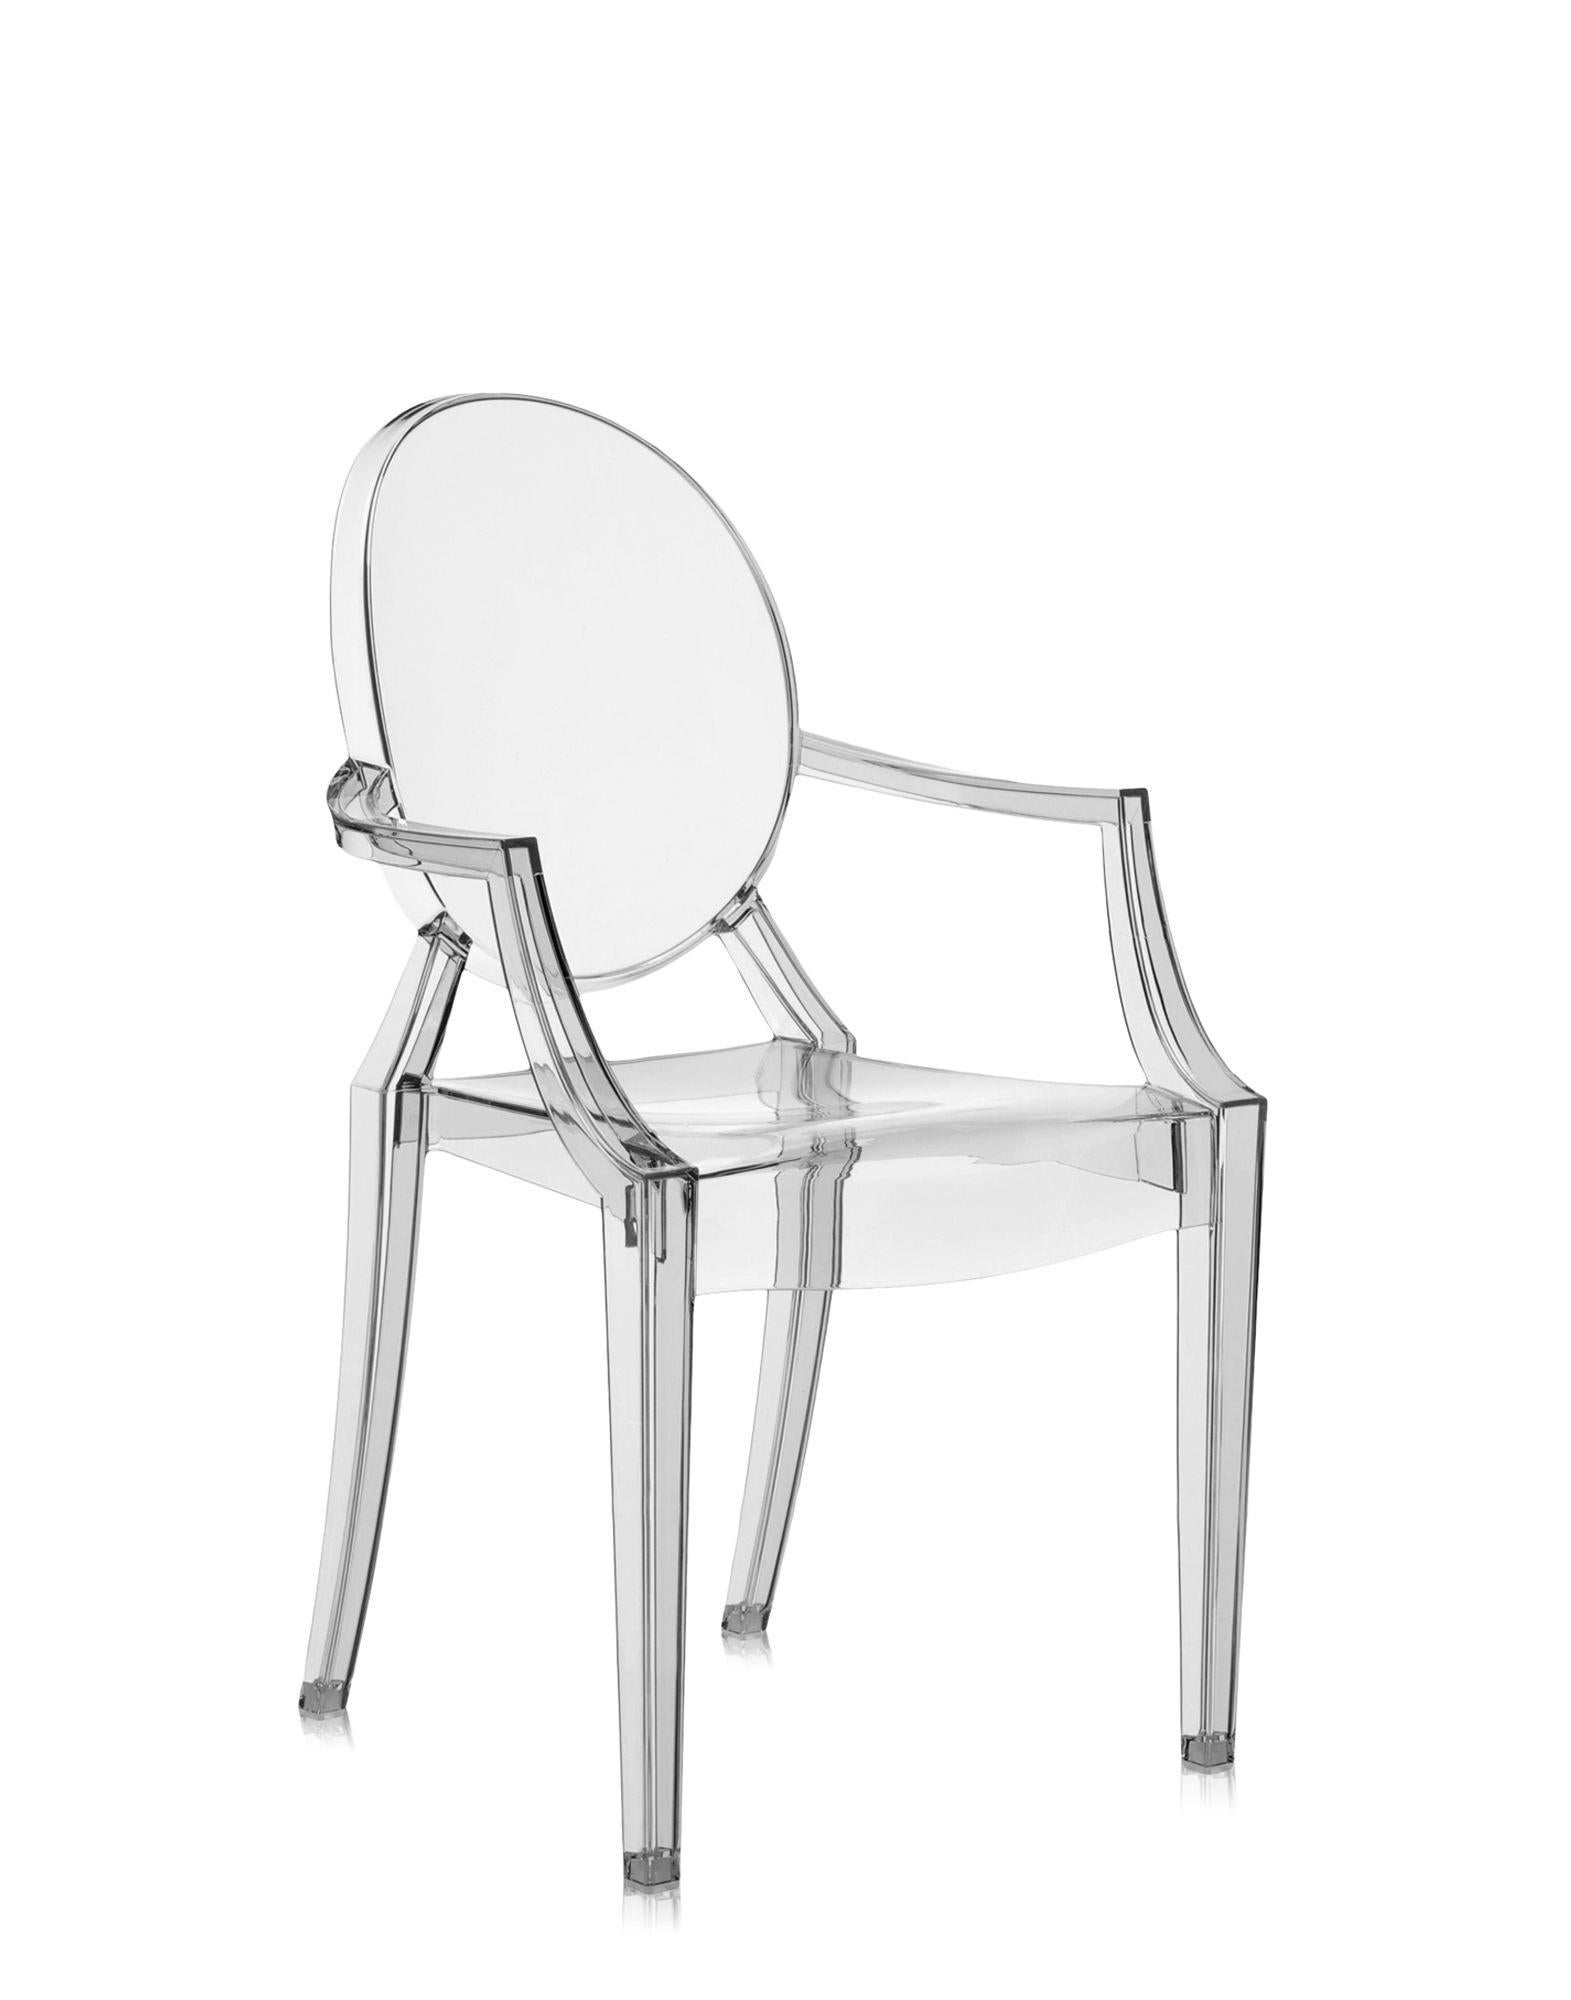 A comfortable armchair in transparent and colored polycarbonate in the Louis XV style, it is the quintessence of baroque revisited to dazzle, excite and captivate. Louis Ghost is the most daring example in the world of injected polycarbonate in a